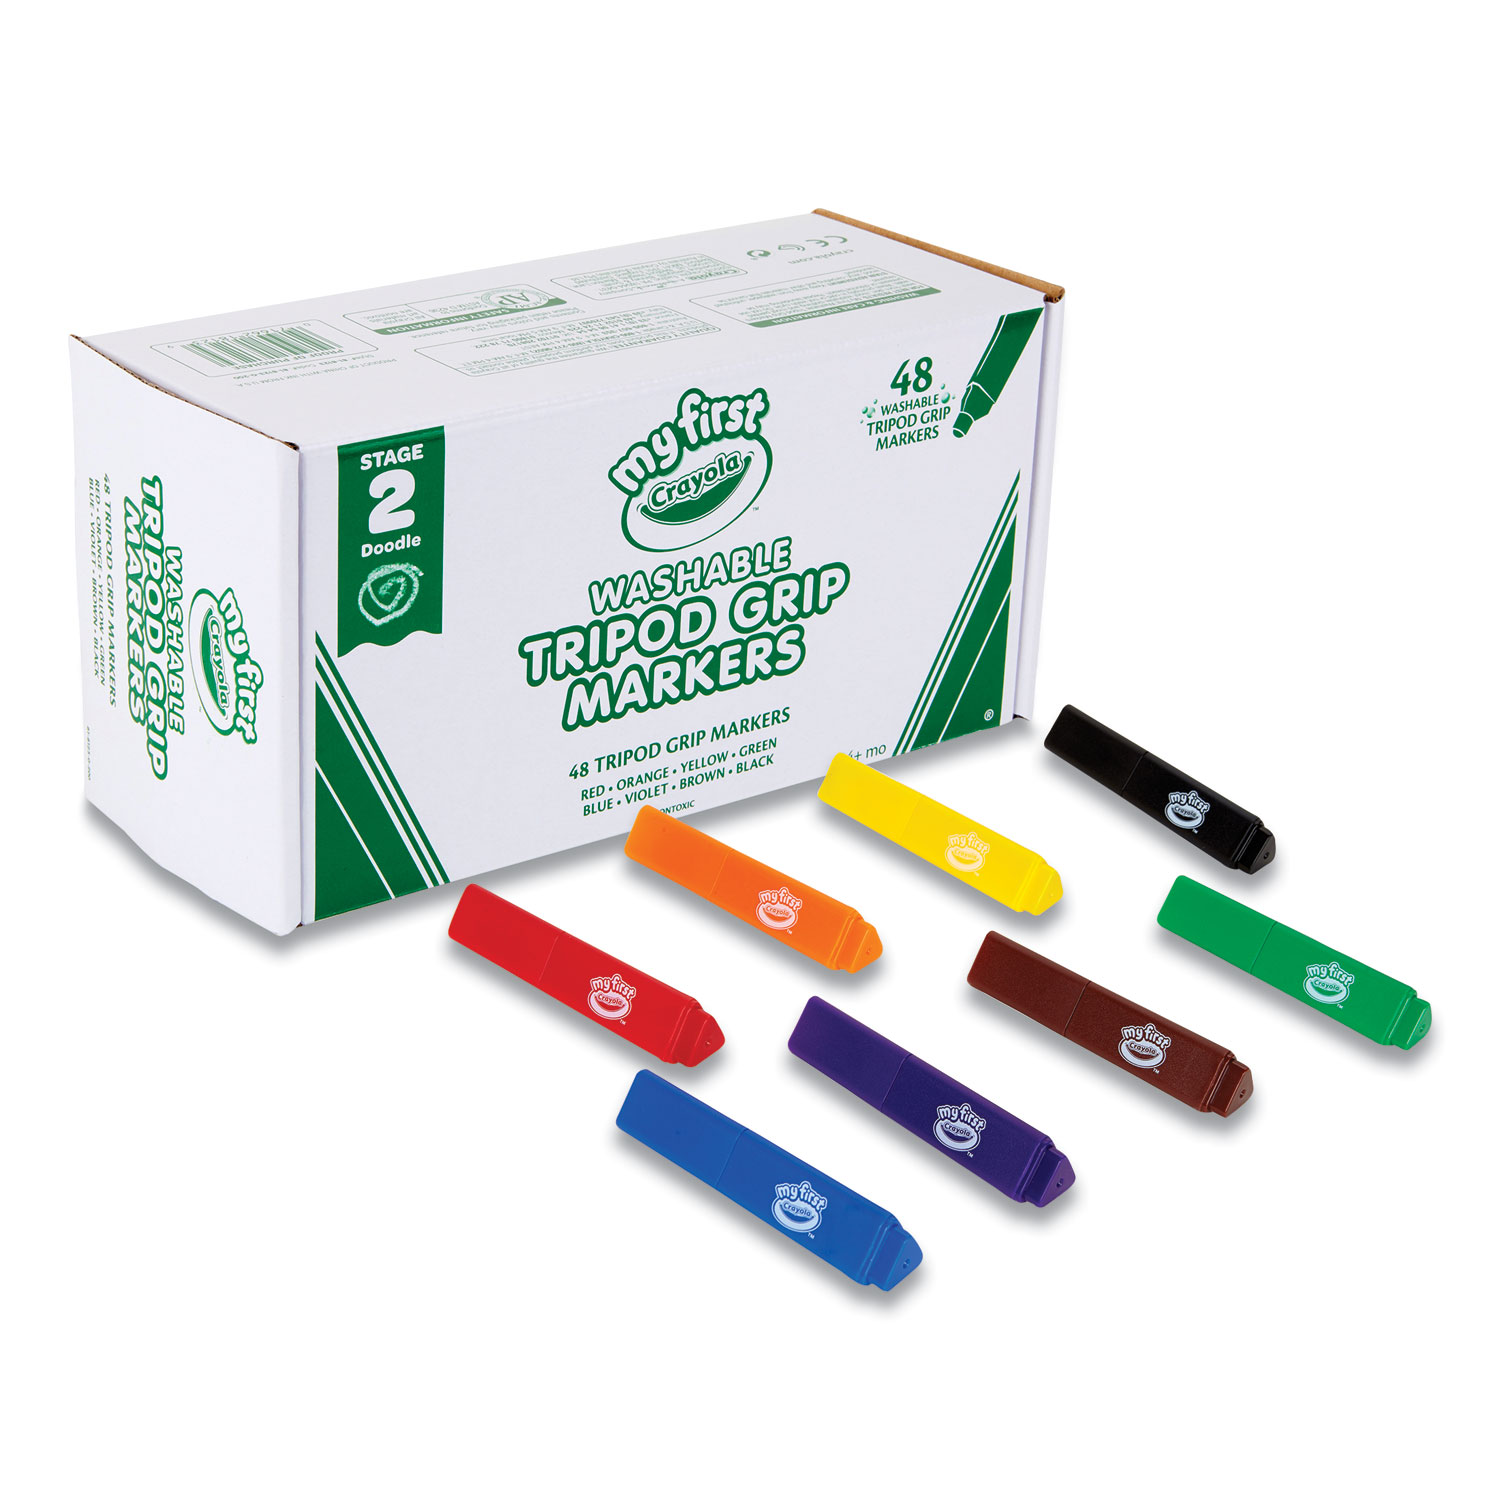 Crayola® My First Triangular Marker, Broad Bullet Tip, Assorted Colors, 8/Set, 6 Sets/Pack